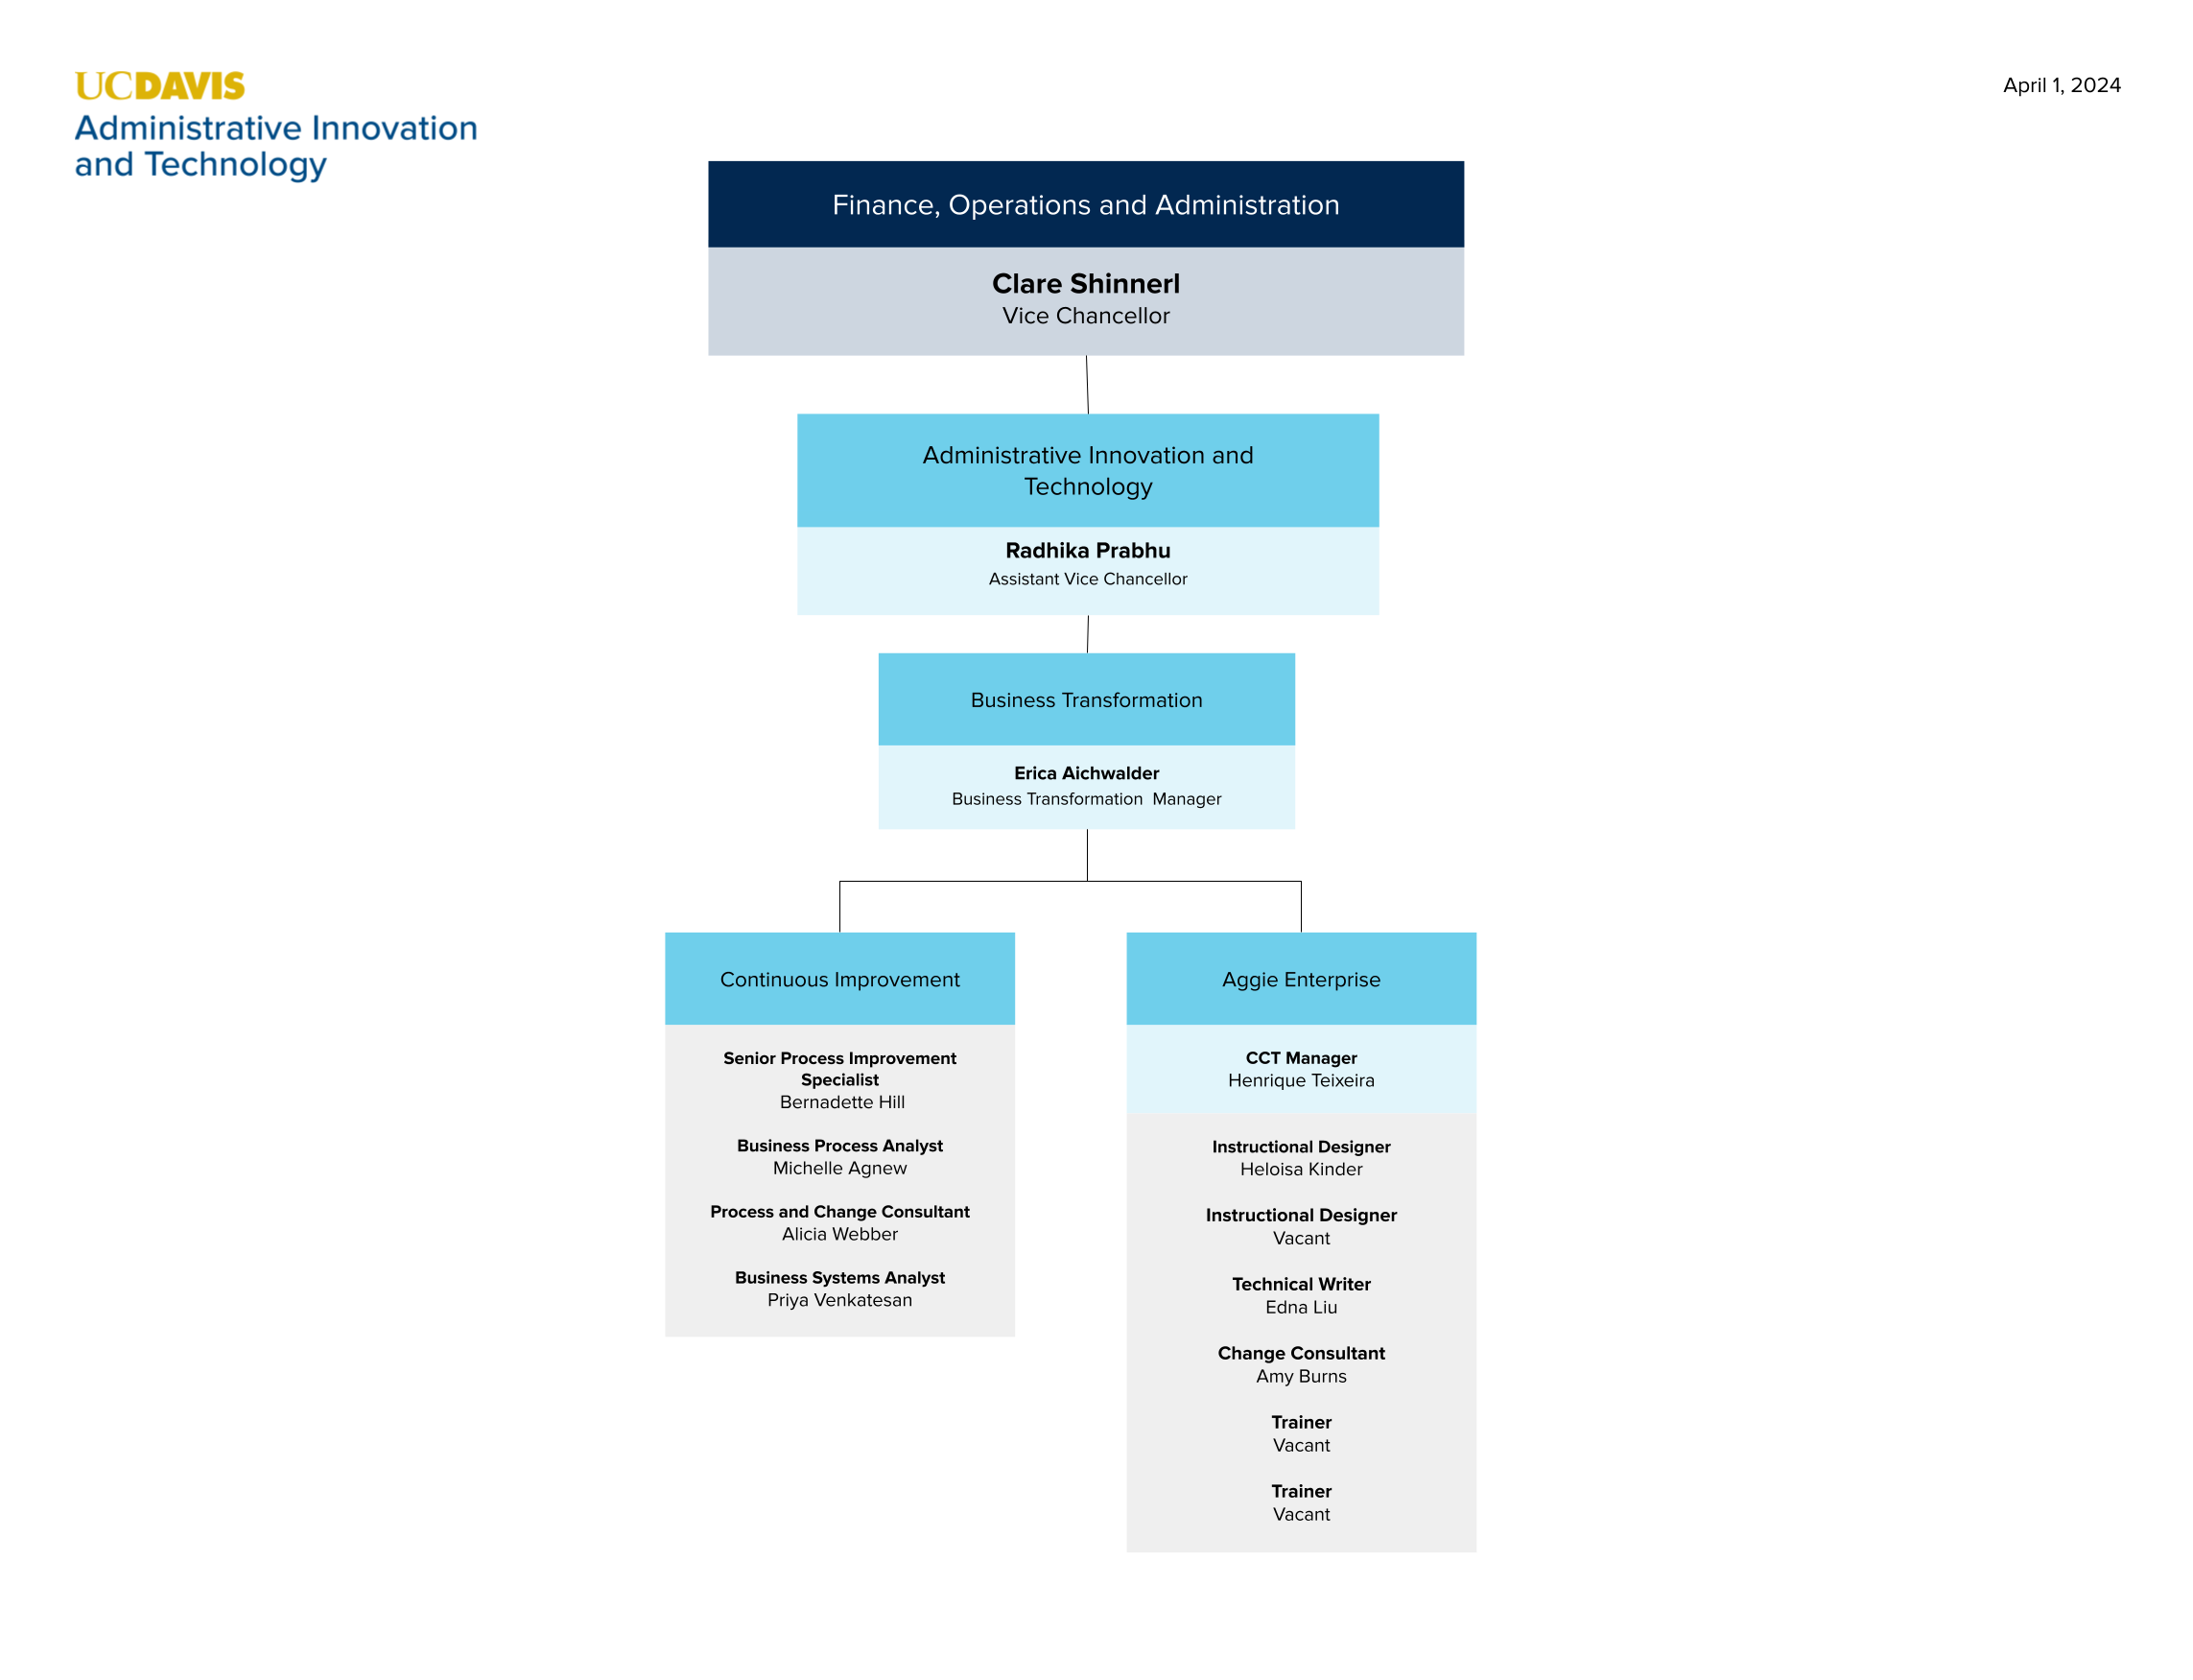 office of business transformation org chart